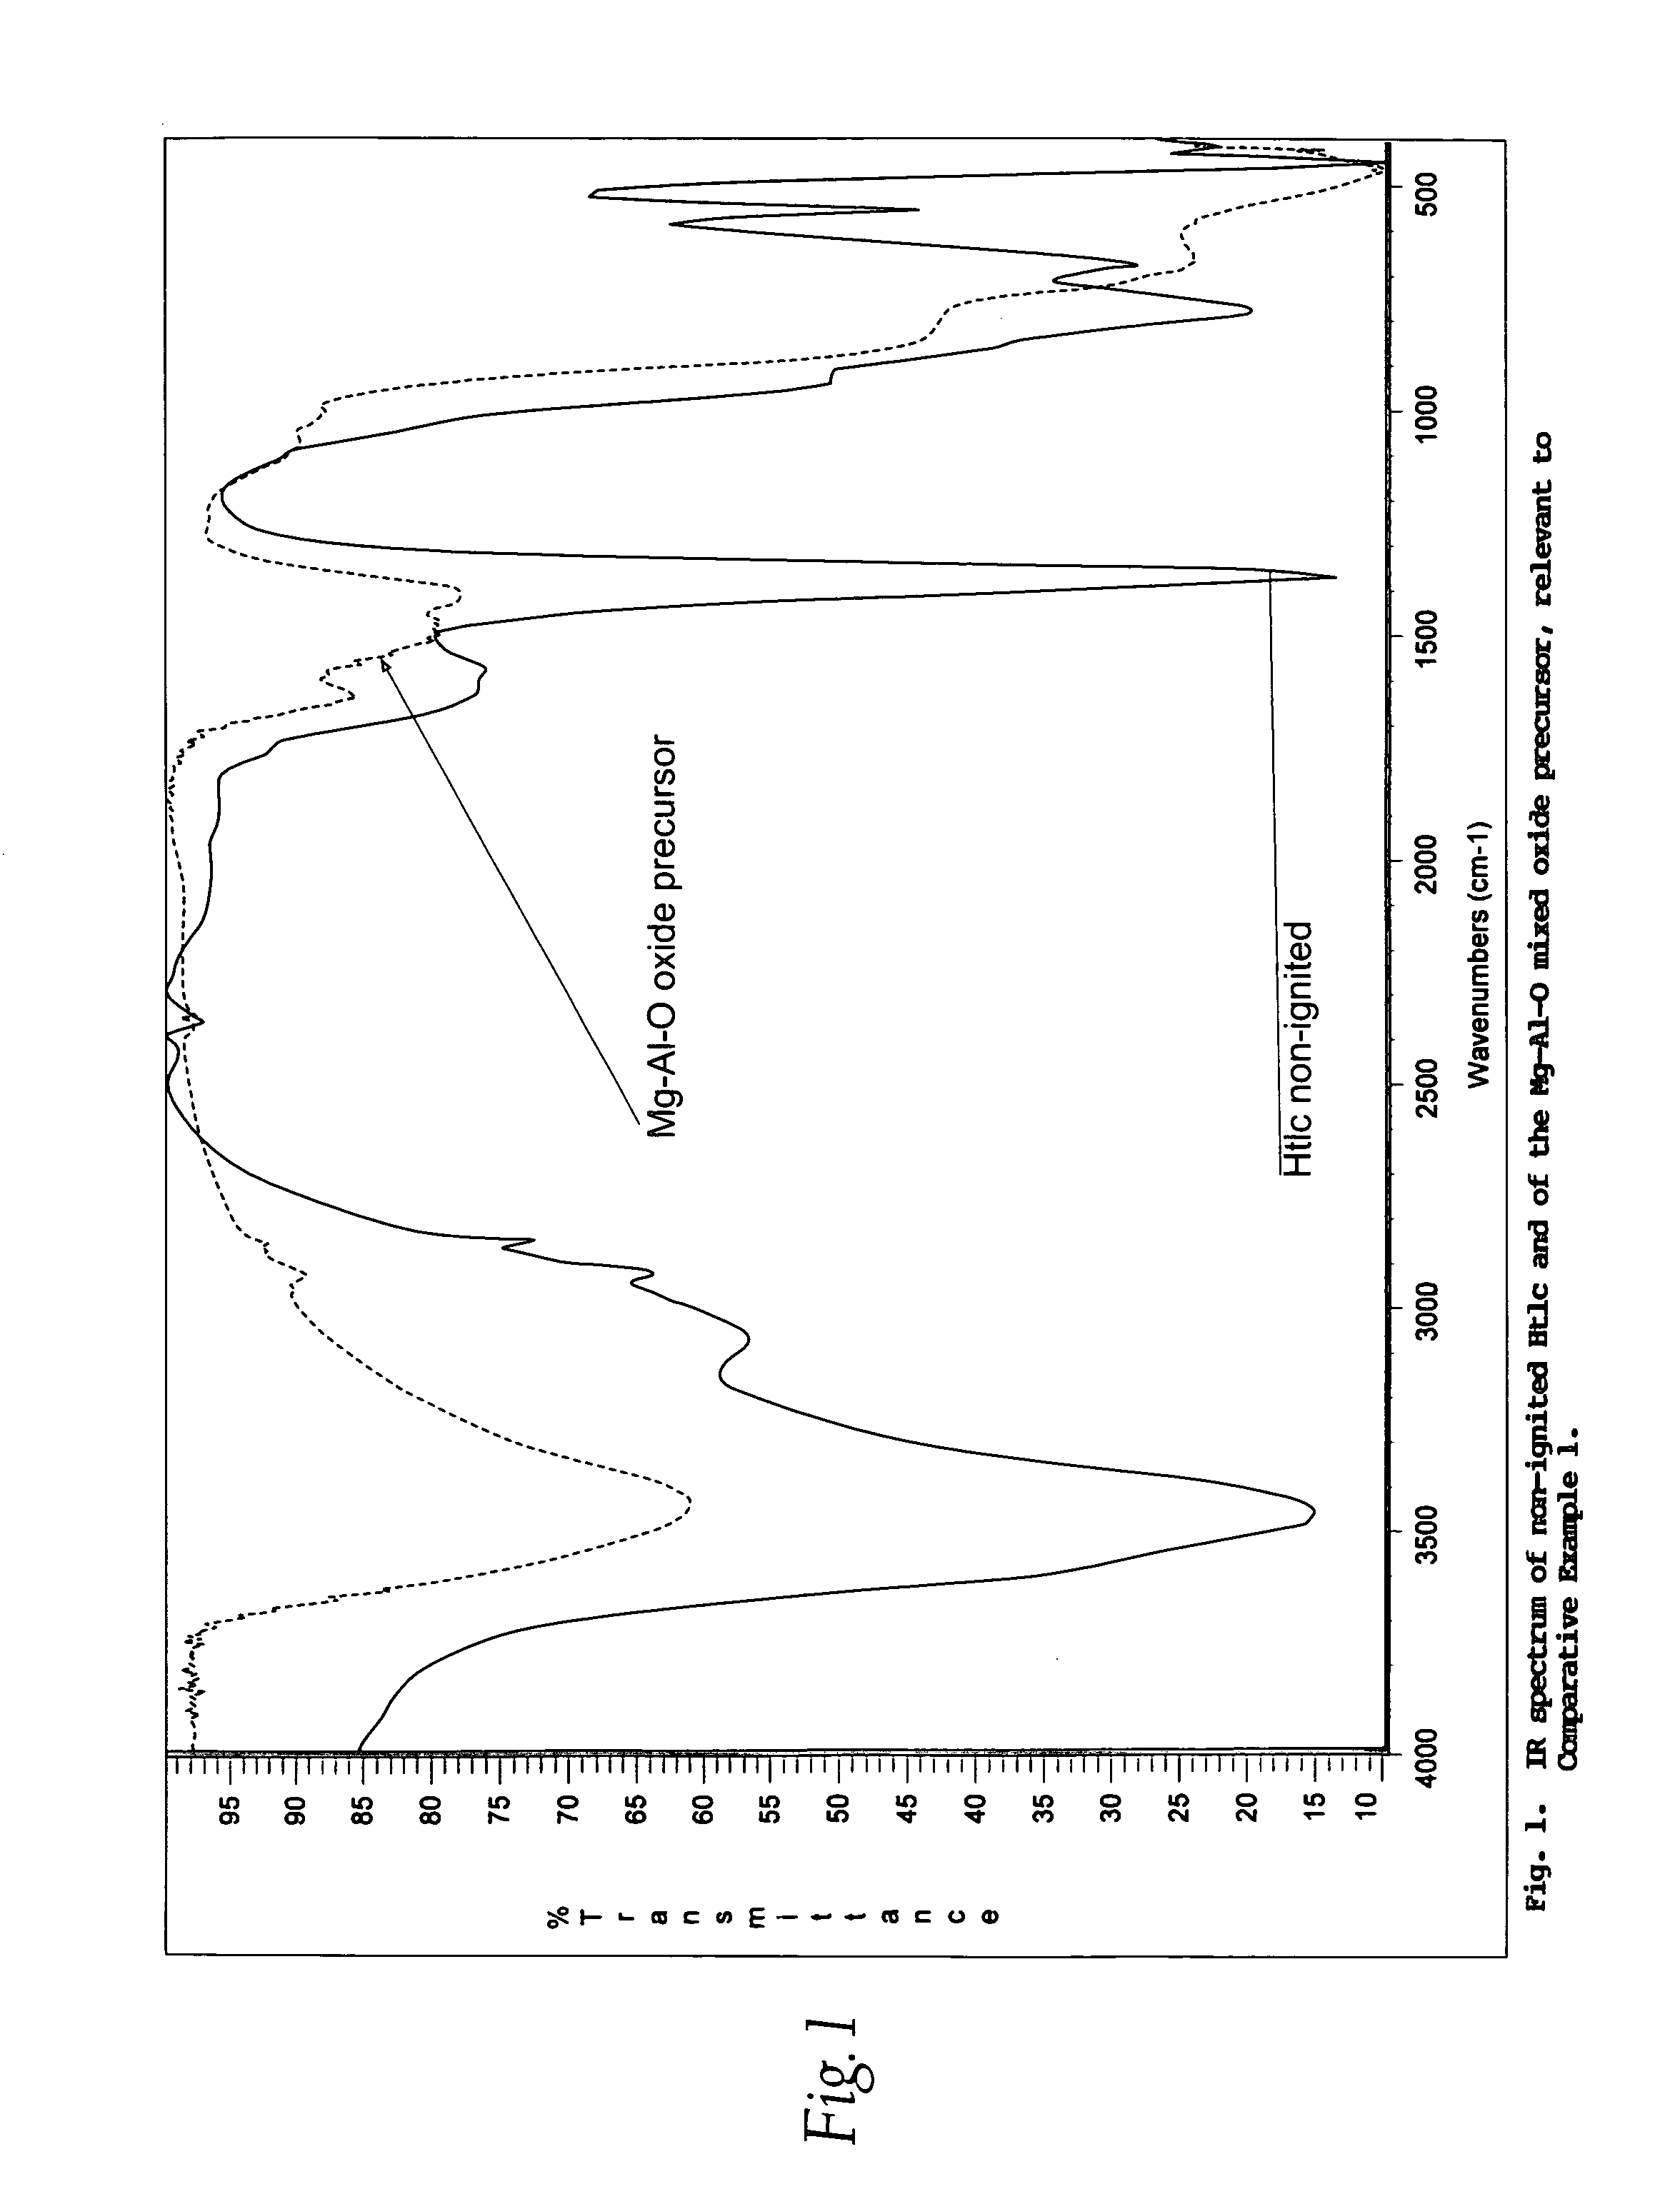 Pigment grade corrosion inhibitor host-guest compositions and procedure